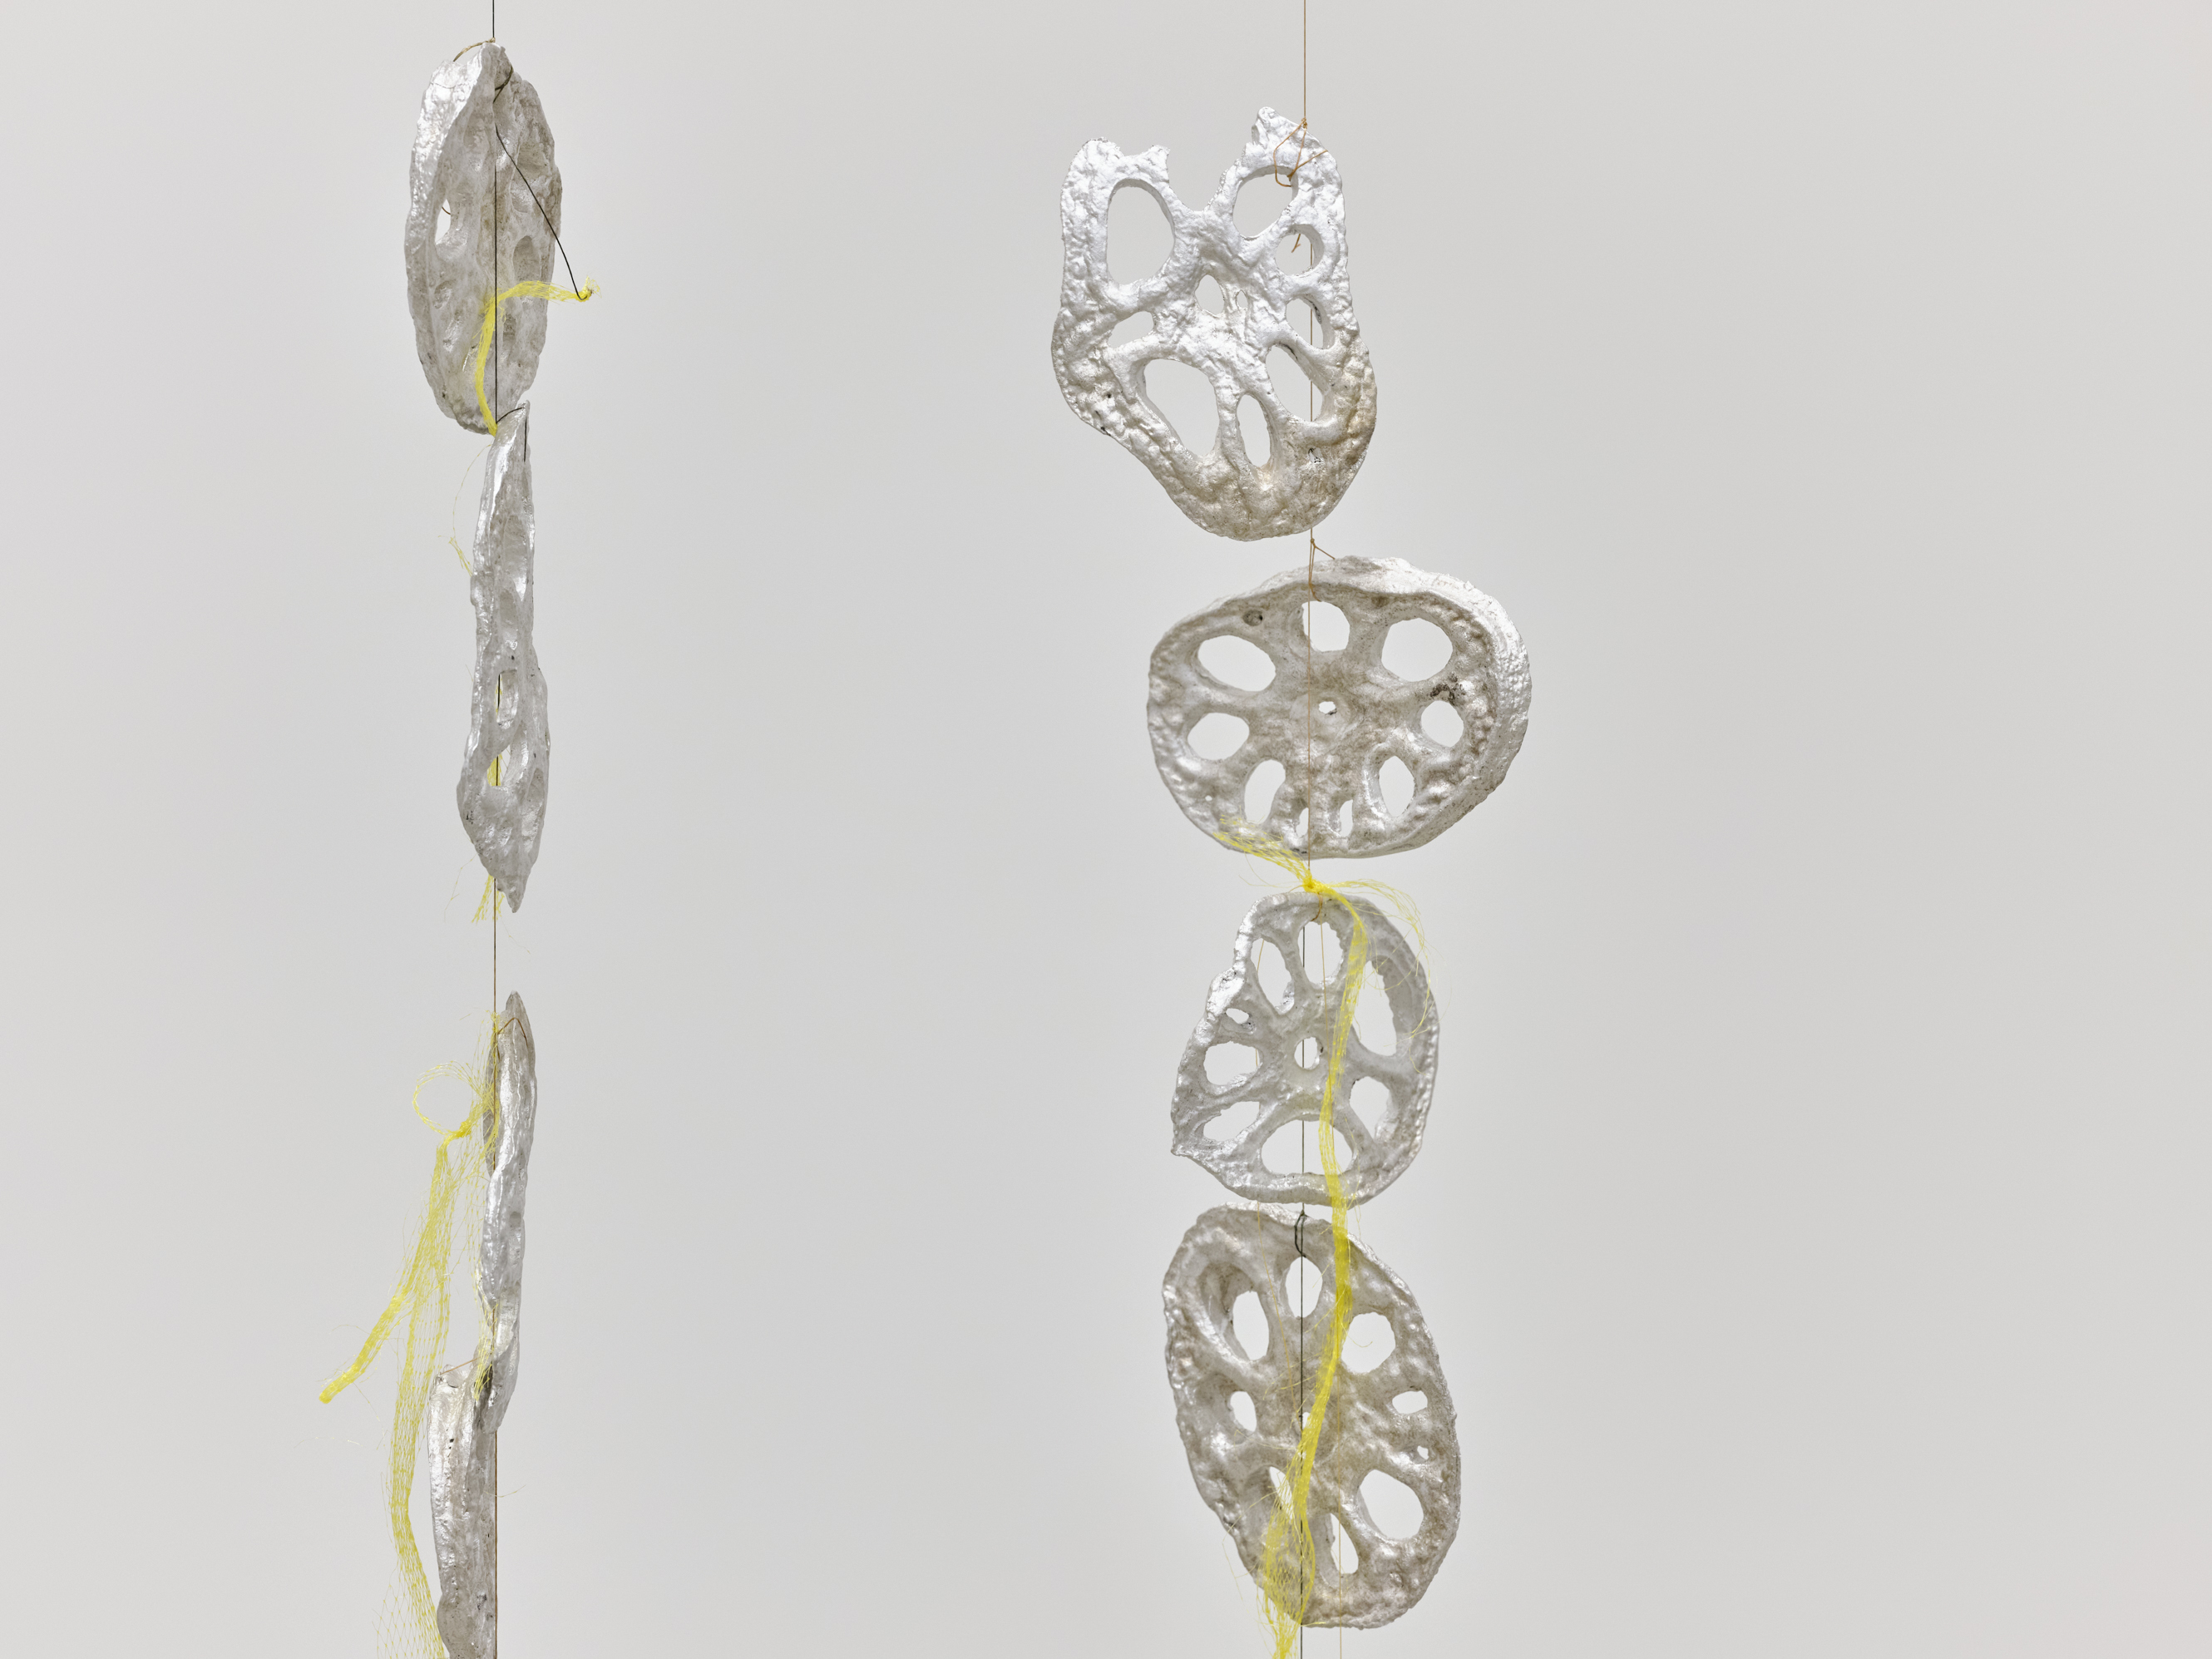 Laurie Kang, Allele (detail), 2022, cast aluminum lotus root, thread, mesh fruit bags, pigmented silicone, rubber, 66 x 17.5 x 13 in. (168 x 45 x 33 cm) by 